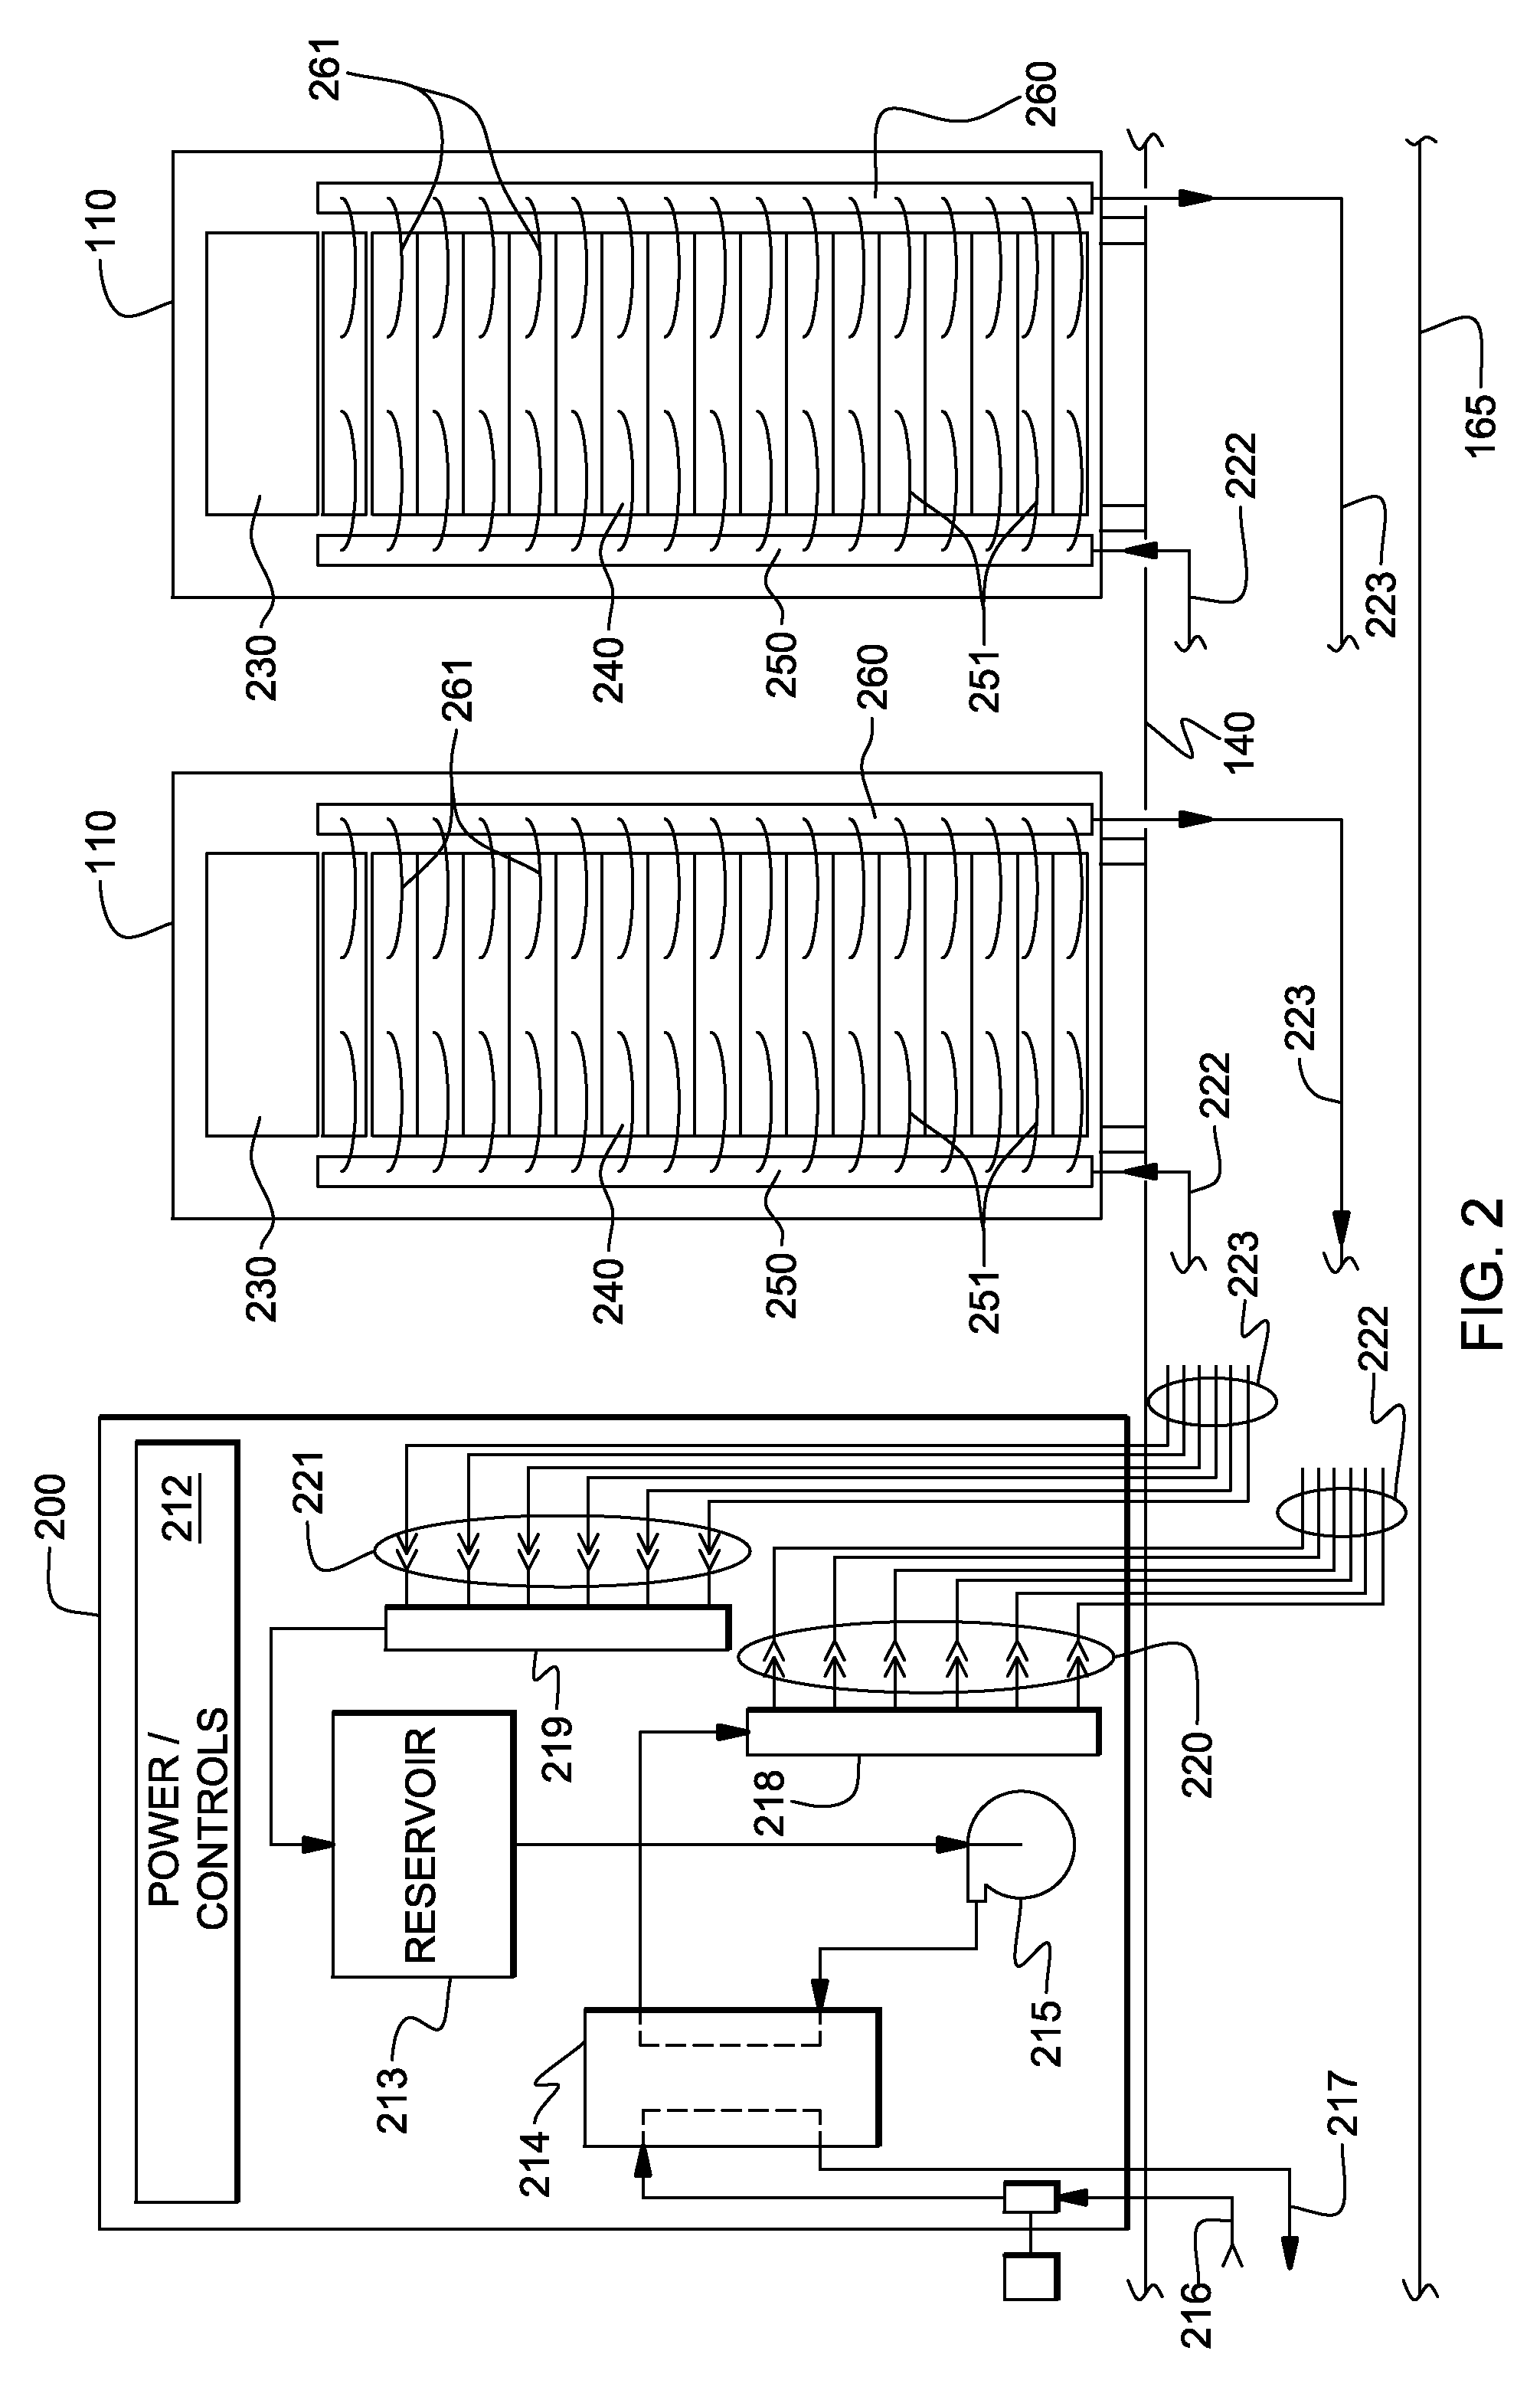 Liquid-cooled cooling apparatus, electronics rack and methods of fabrication thereof